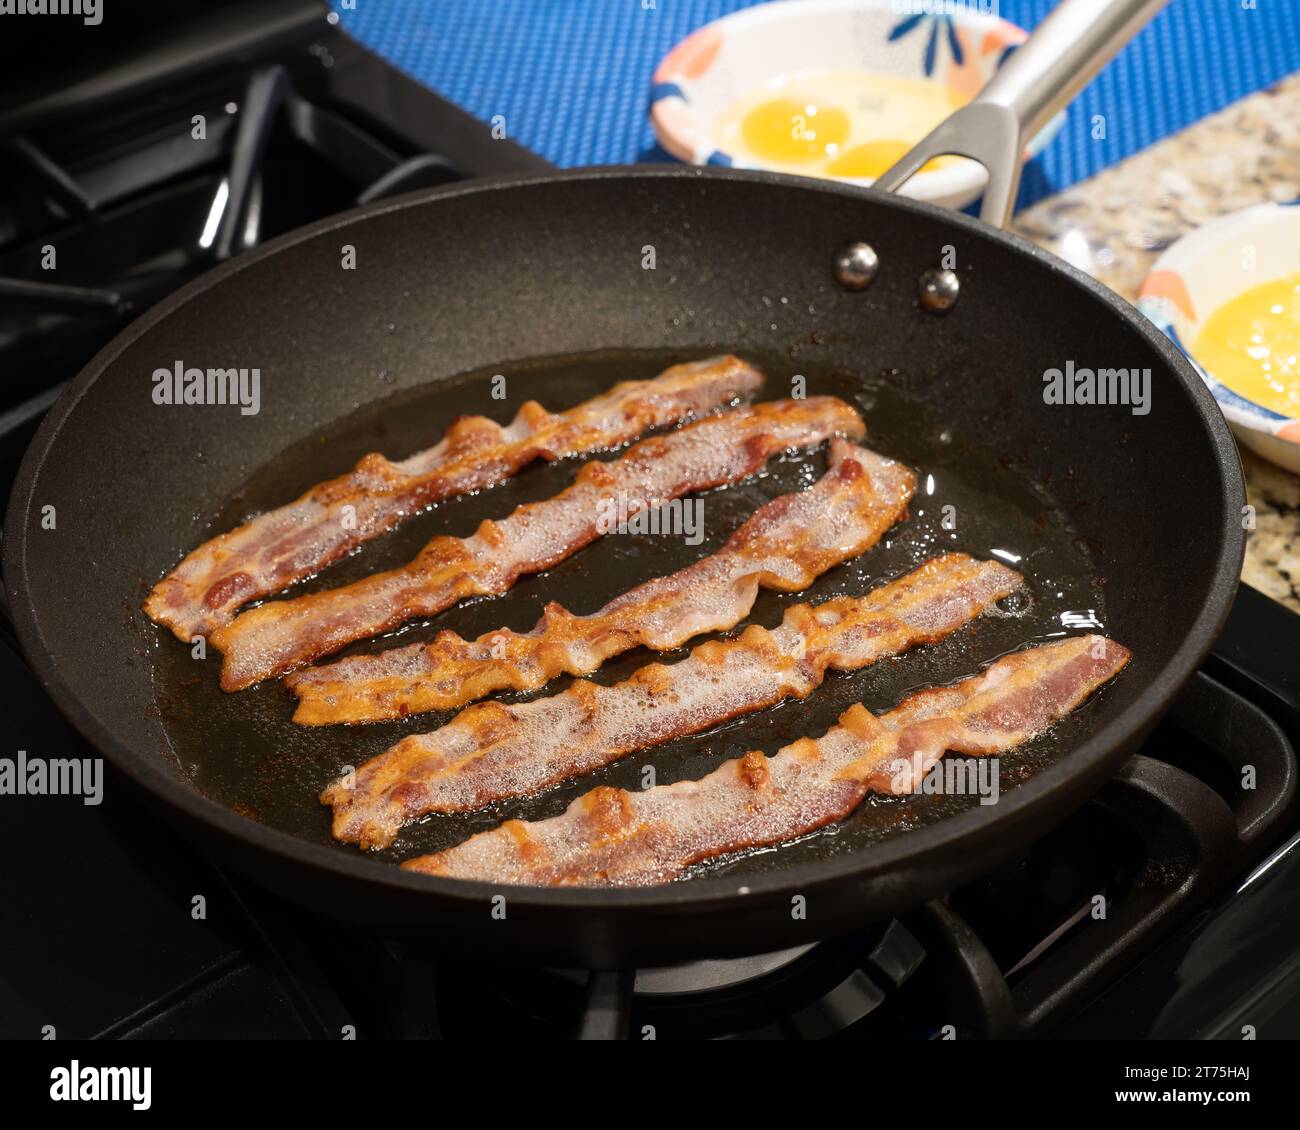 https://c8.alamy.com/comp/2T75HAJ/bacon-frying-or-cooking-in-a-skillet-for-breakfast-in-a-home-kitchen-in-the-usa-2T75HAJ.jpg